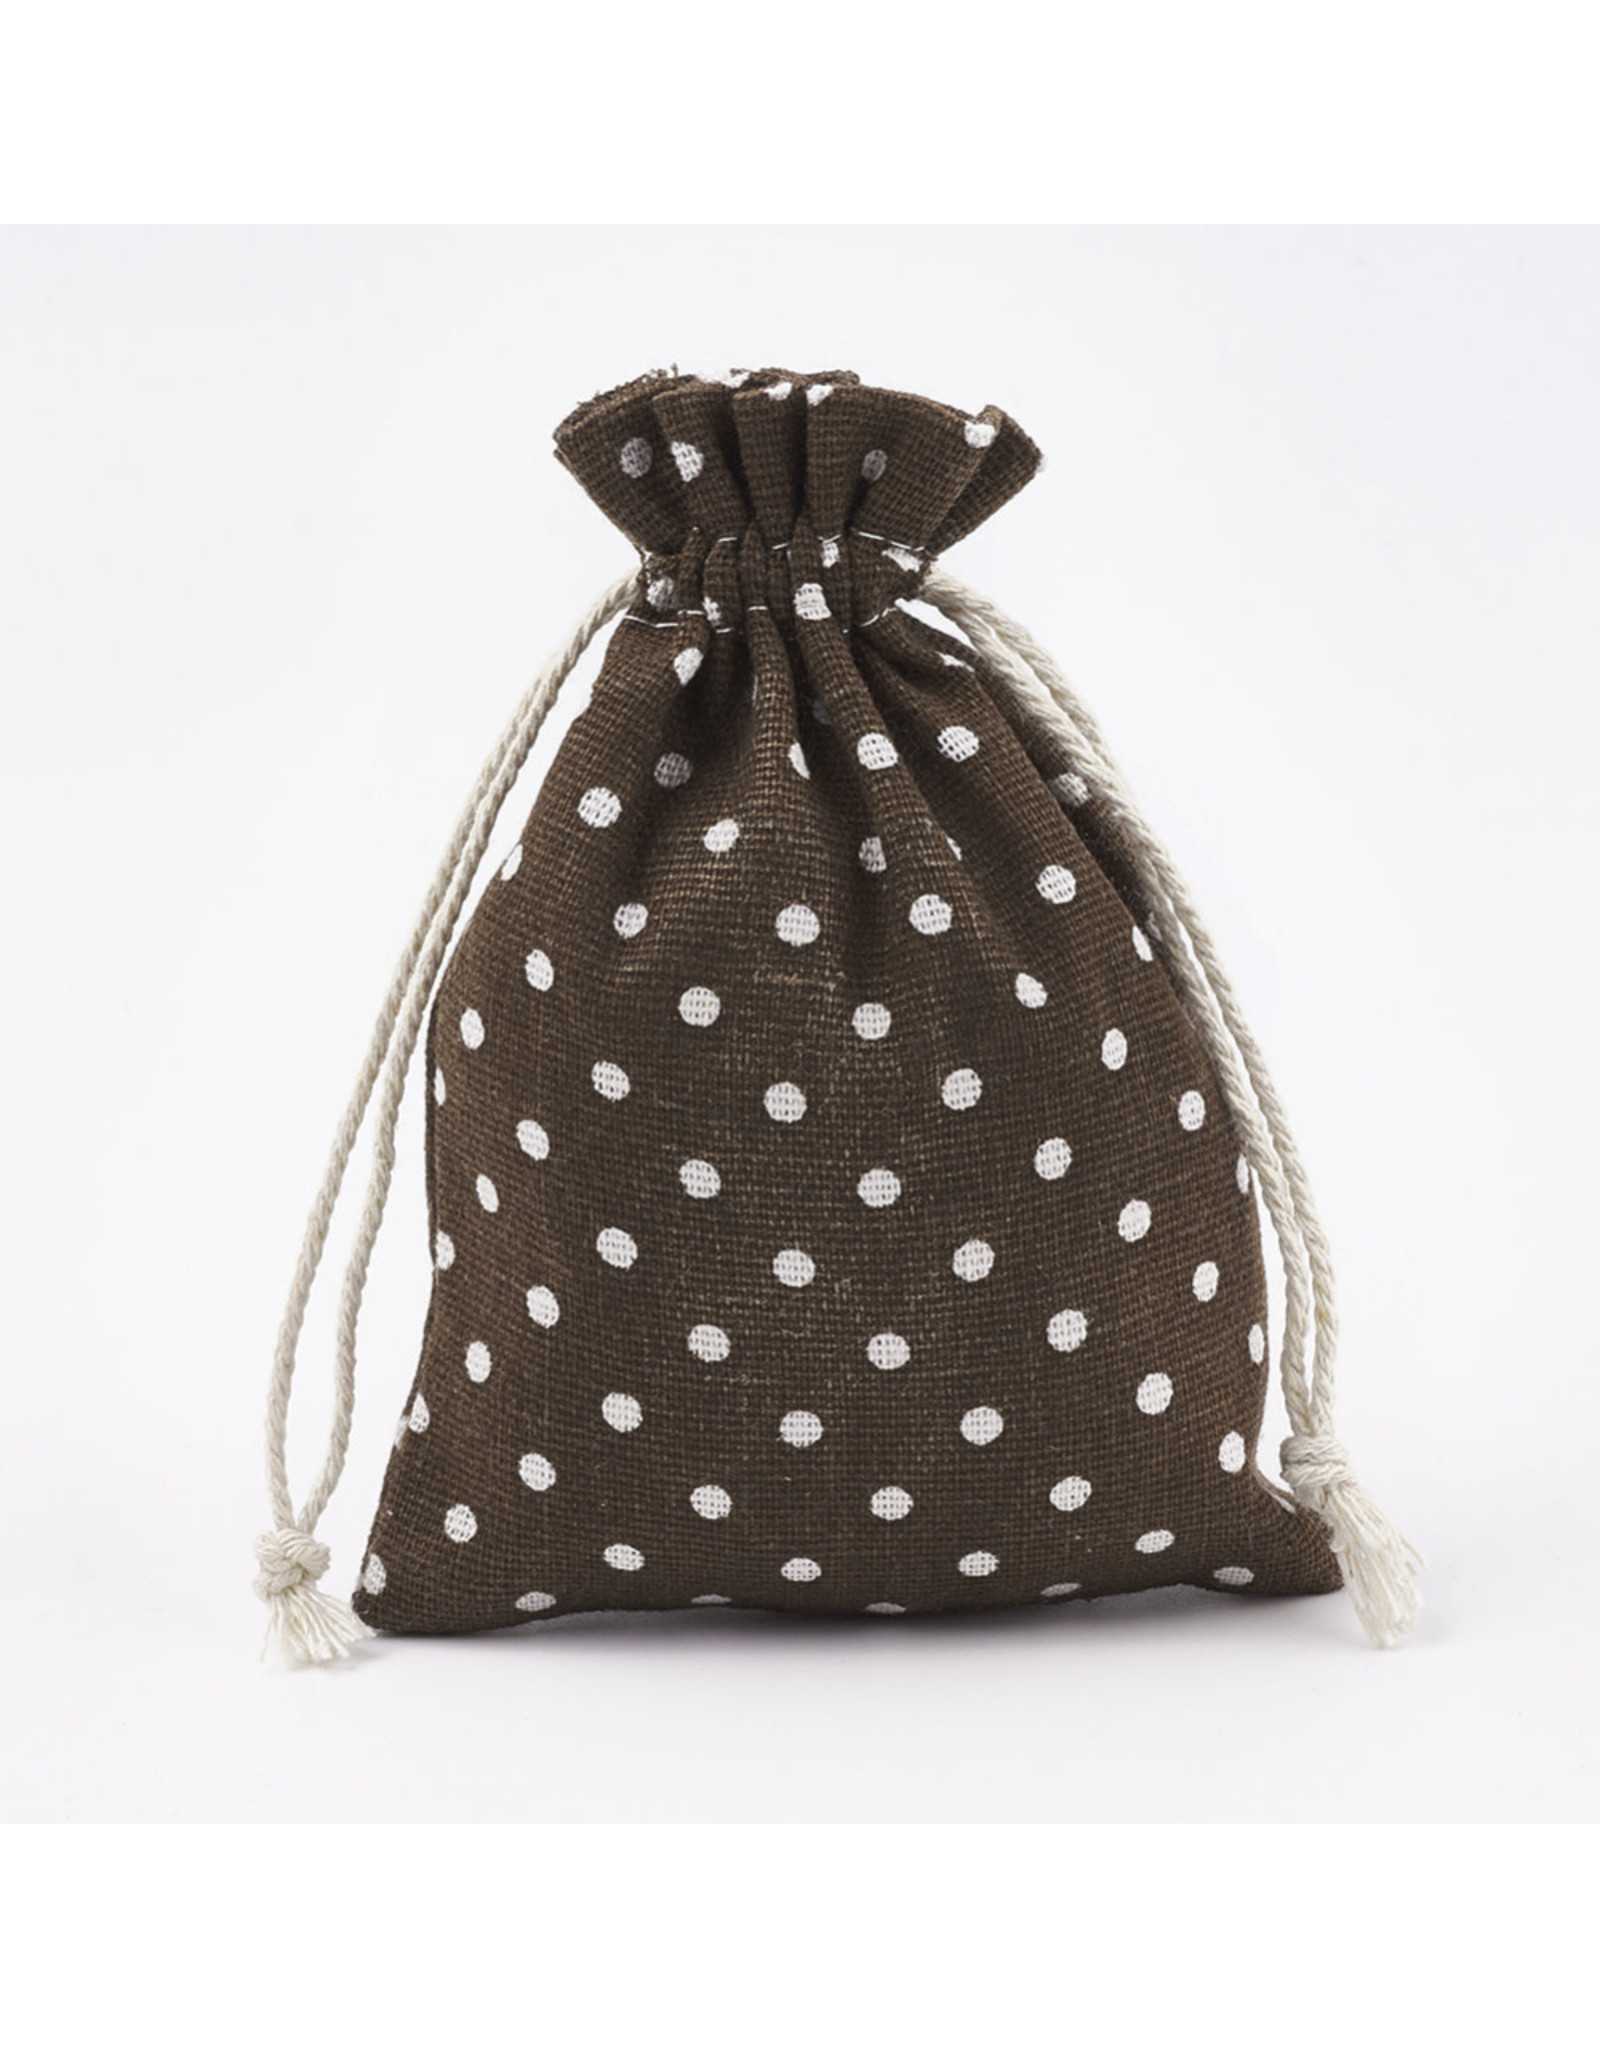 Gift Bag Brown with White Polka Dots  14x10cm  x5